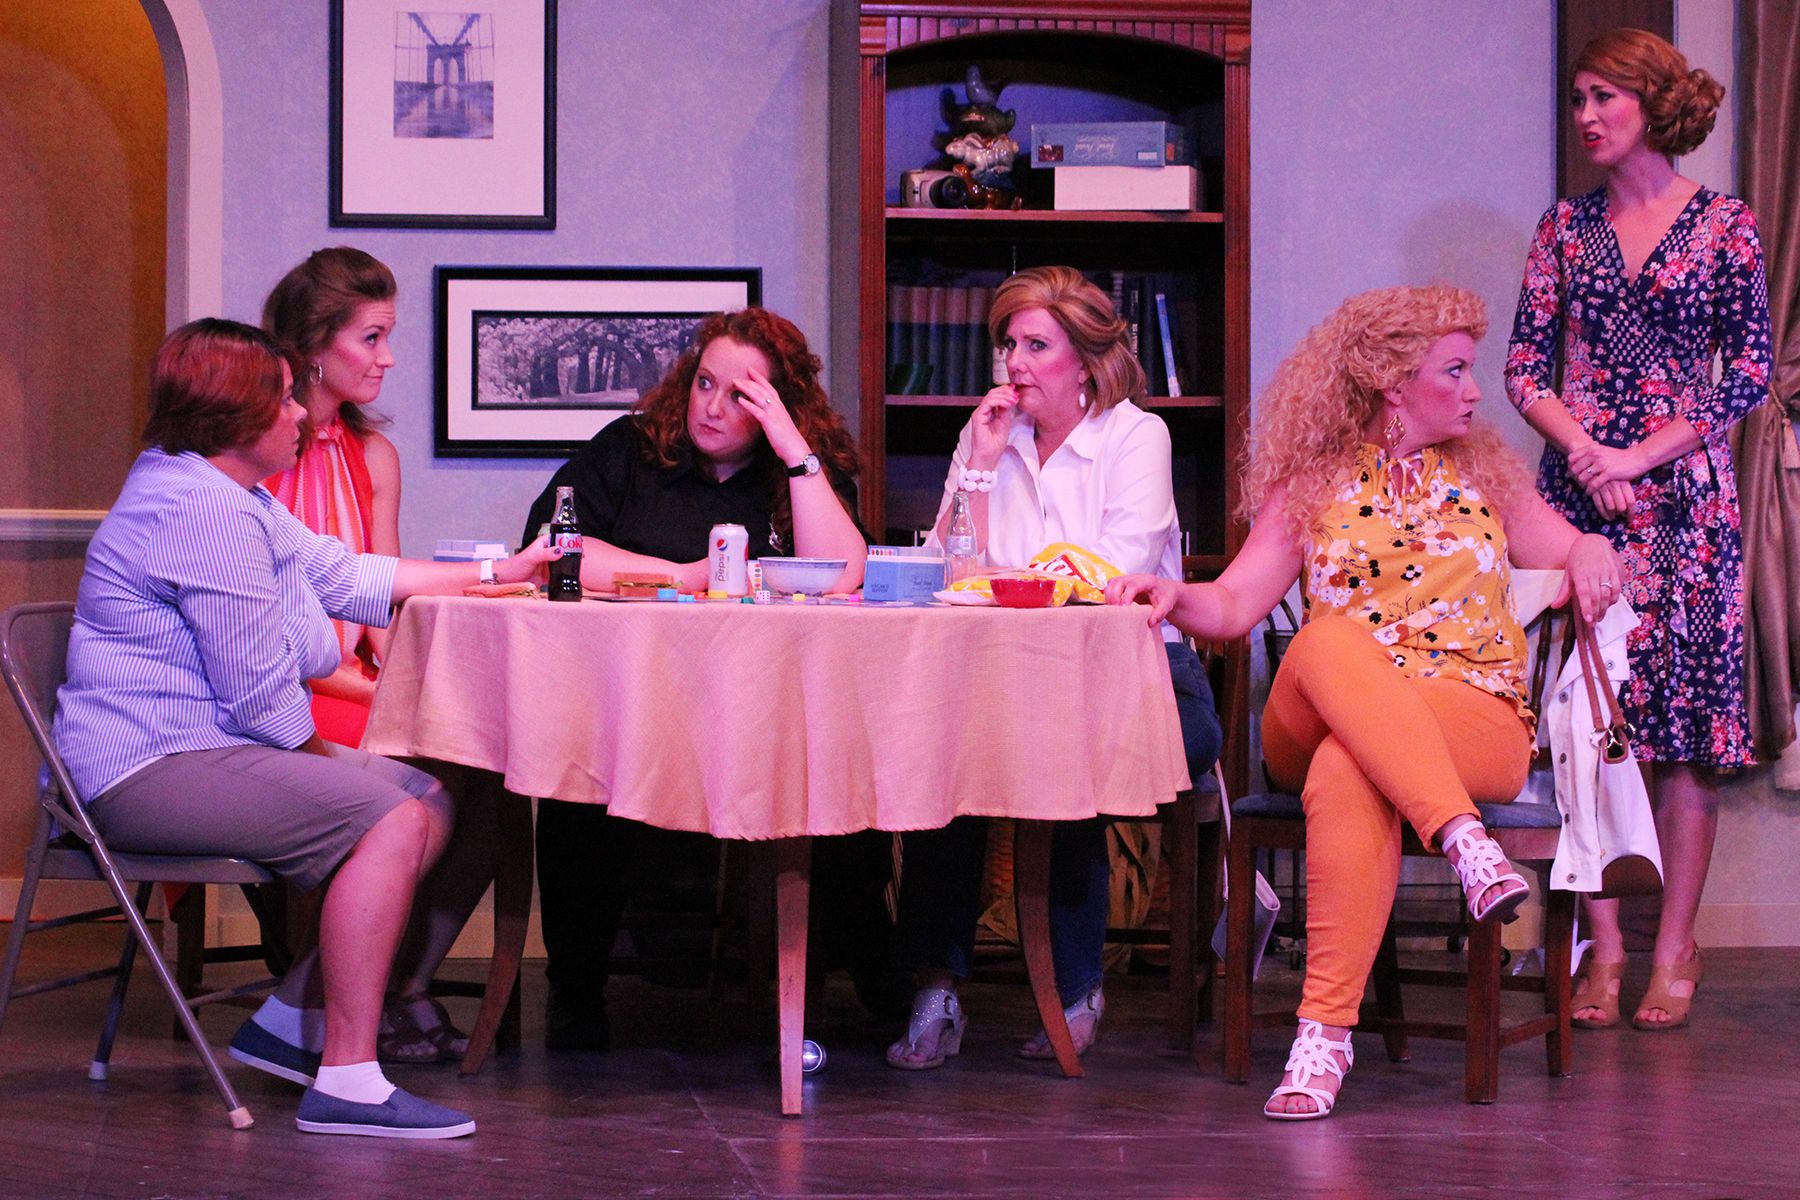 Men out, ladies in at Off Broadway’s ‘Odd Couple: Female Version’